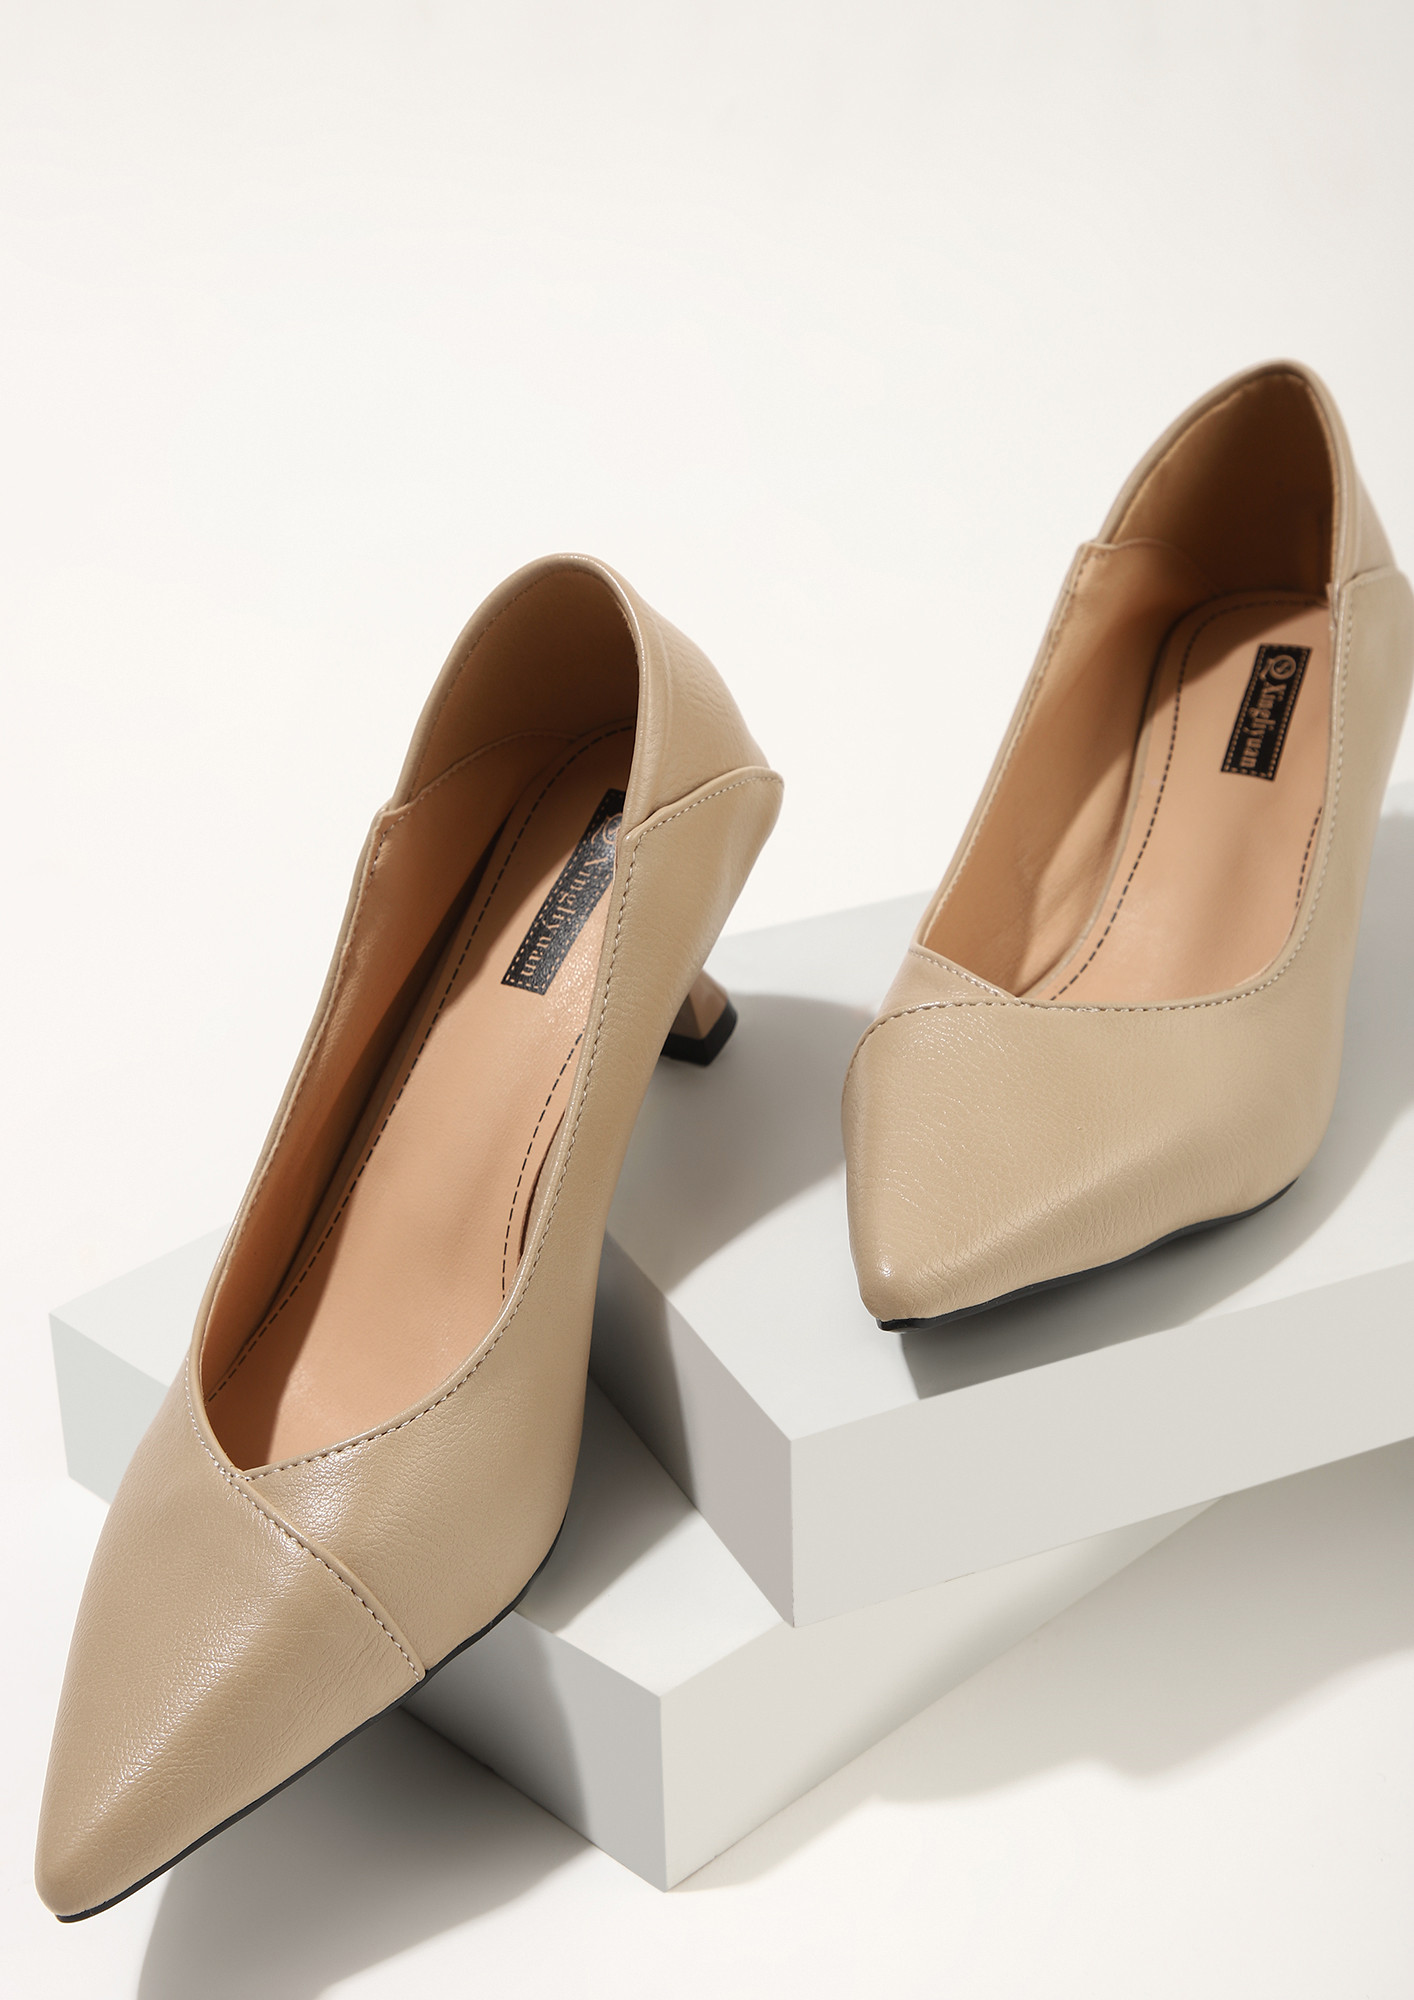 STEP UP YOUR STYLE BEIGE PUMPS